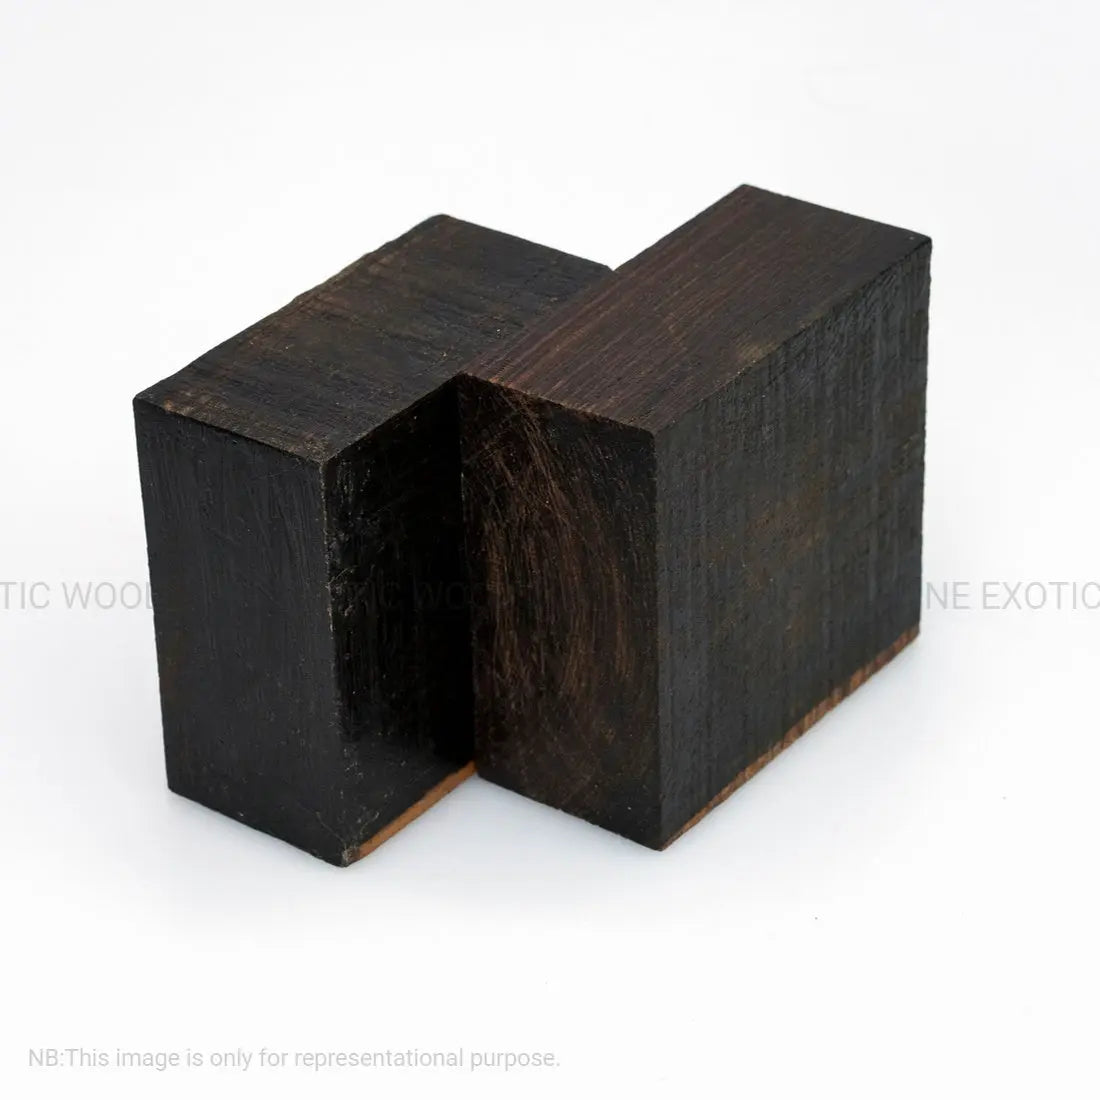 Pack Of 2, Bocote Bowl Blank Lathe Turning Wood Blocks 6&quot; x 6&quot; x 2&quot; - Exotic Wood Zone - Buy online Across USA 